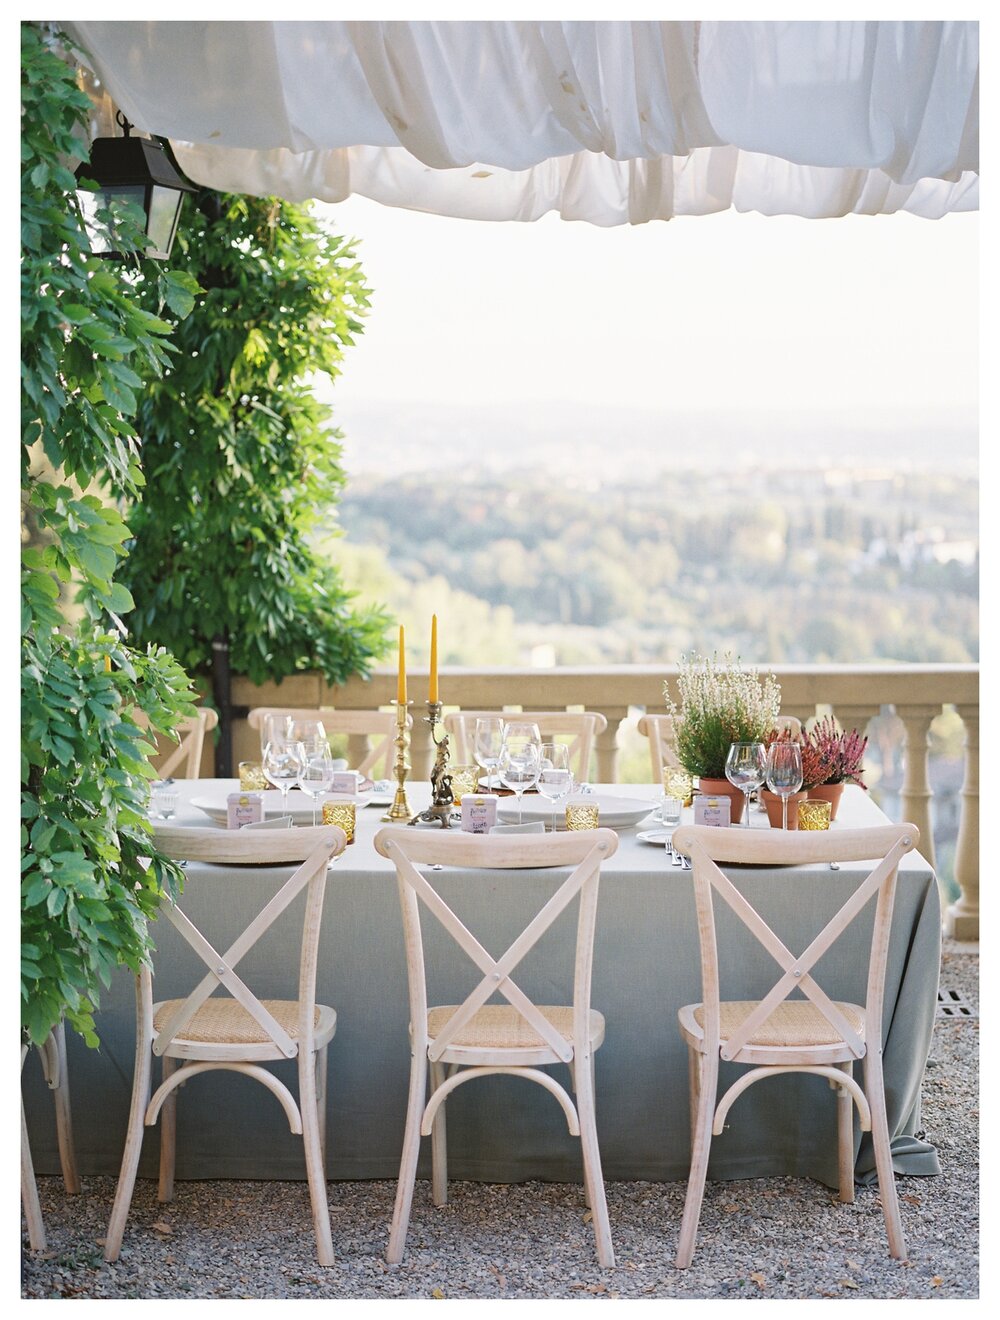  Tuscany wedding table with a view, Tuscany landscape wedding, wedding chairs, wedding table decor, destination wedding villa le fontanelle 